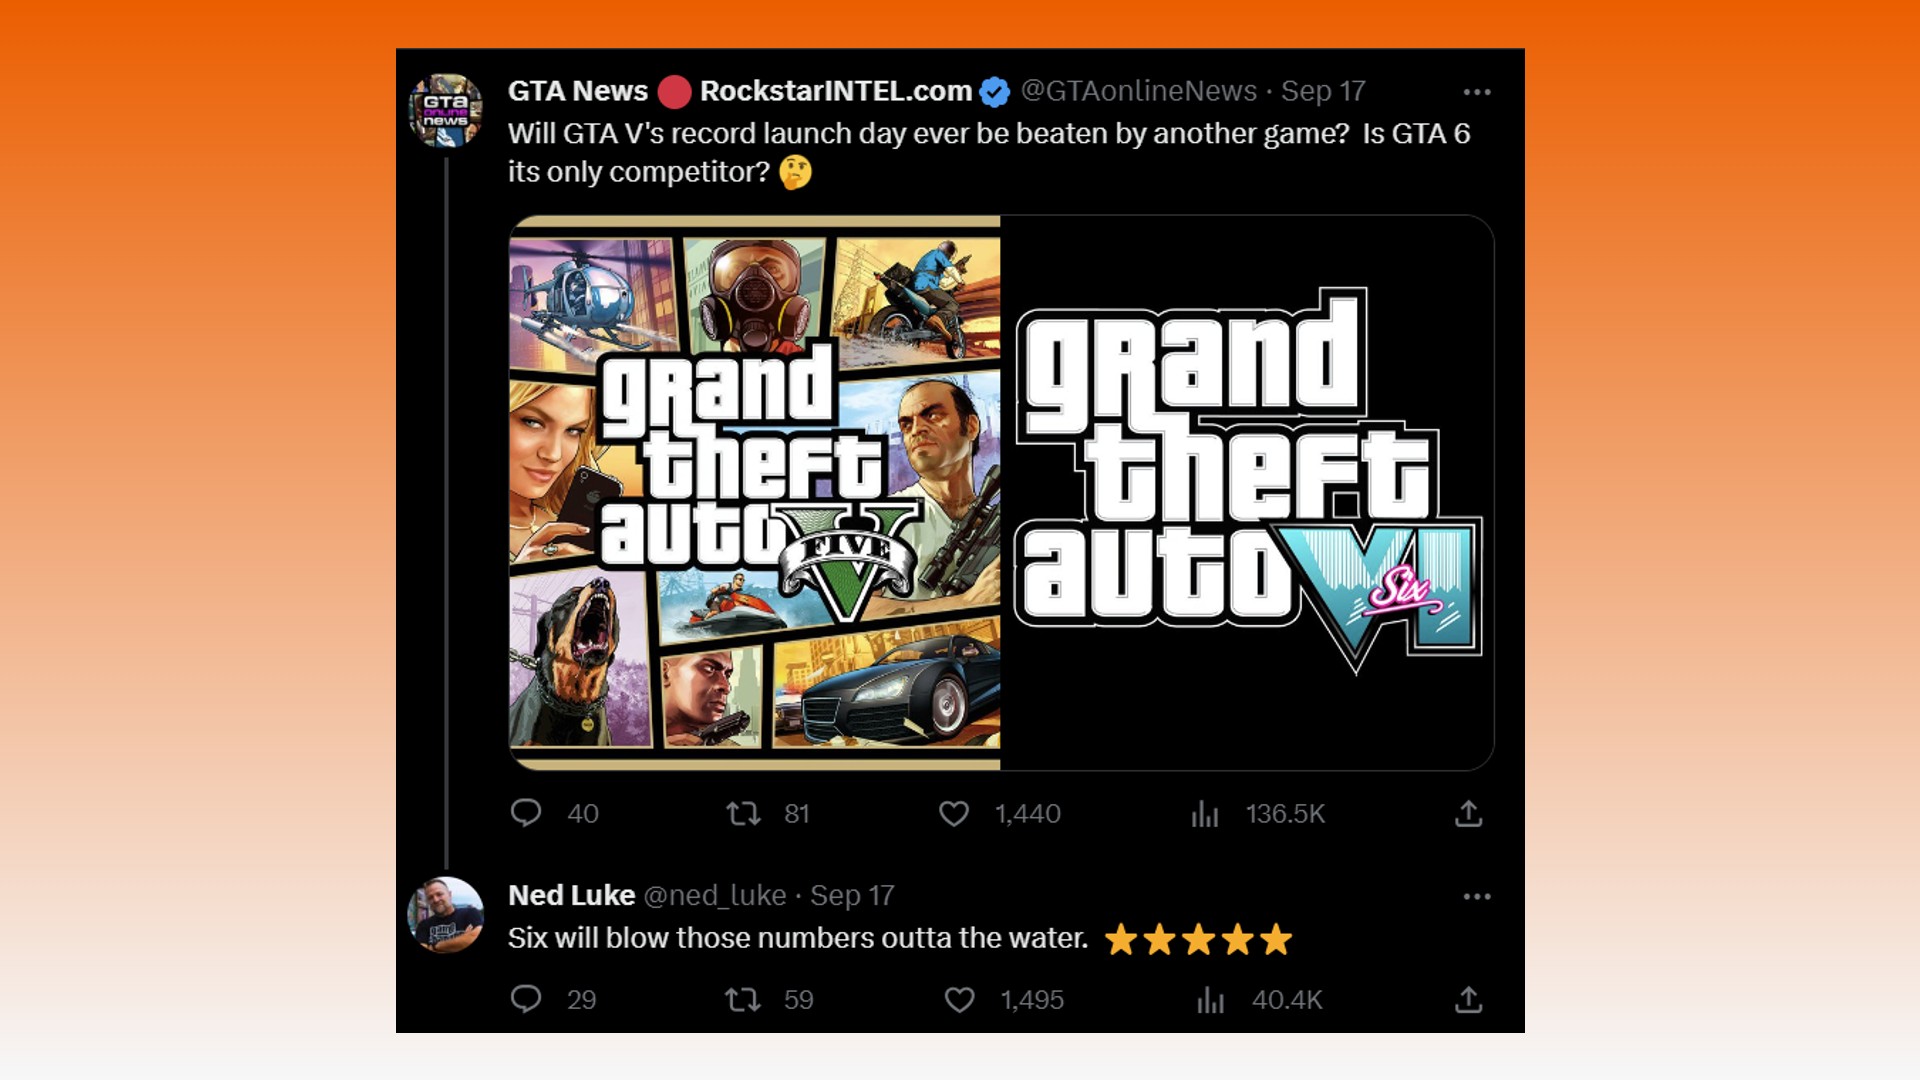 GTA 5 Michael: A tweet from Ned Luke, the GTA 5 Michael actor, talking about Grand Theft Auto 6 sales